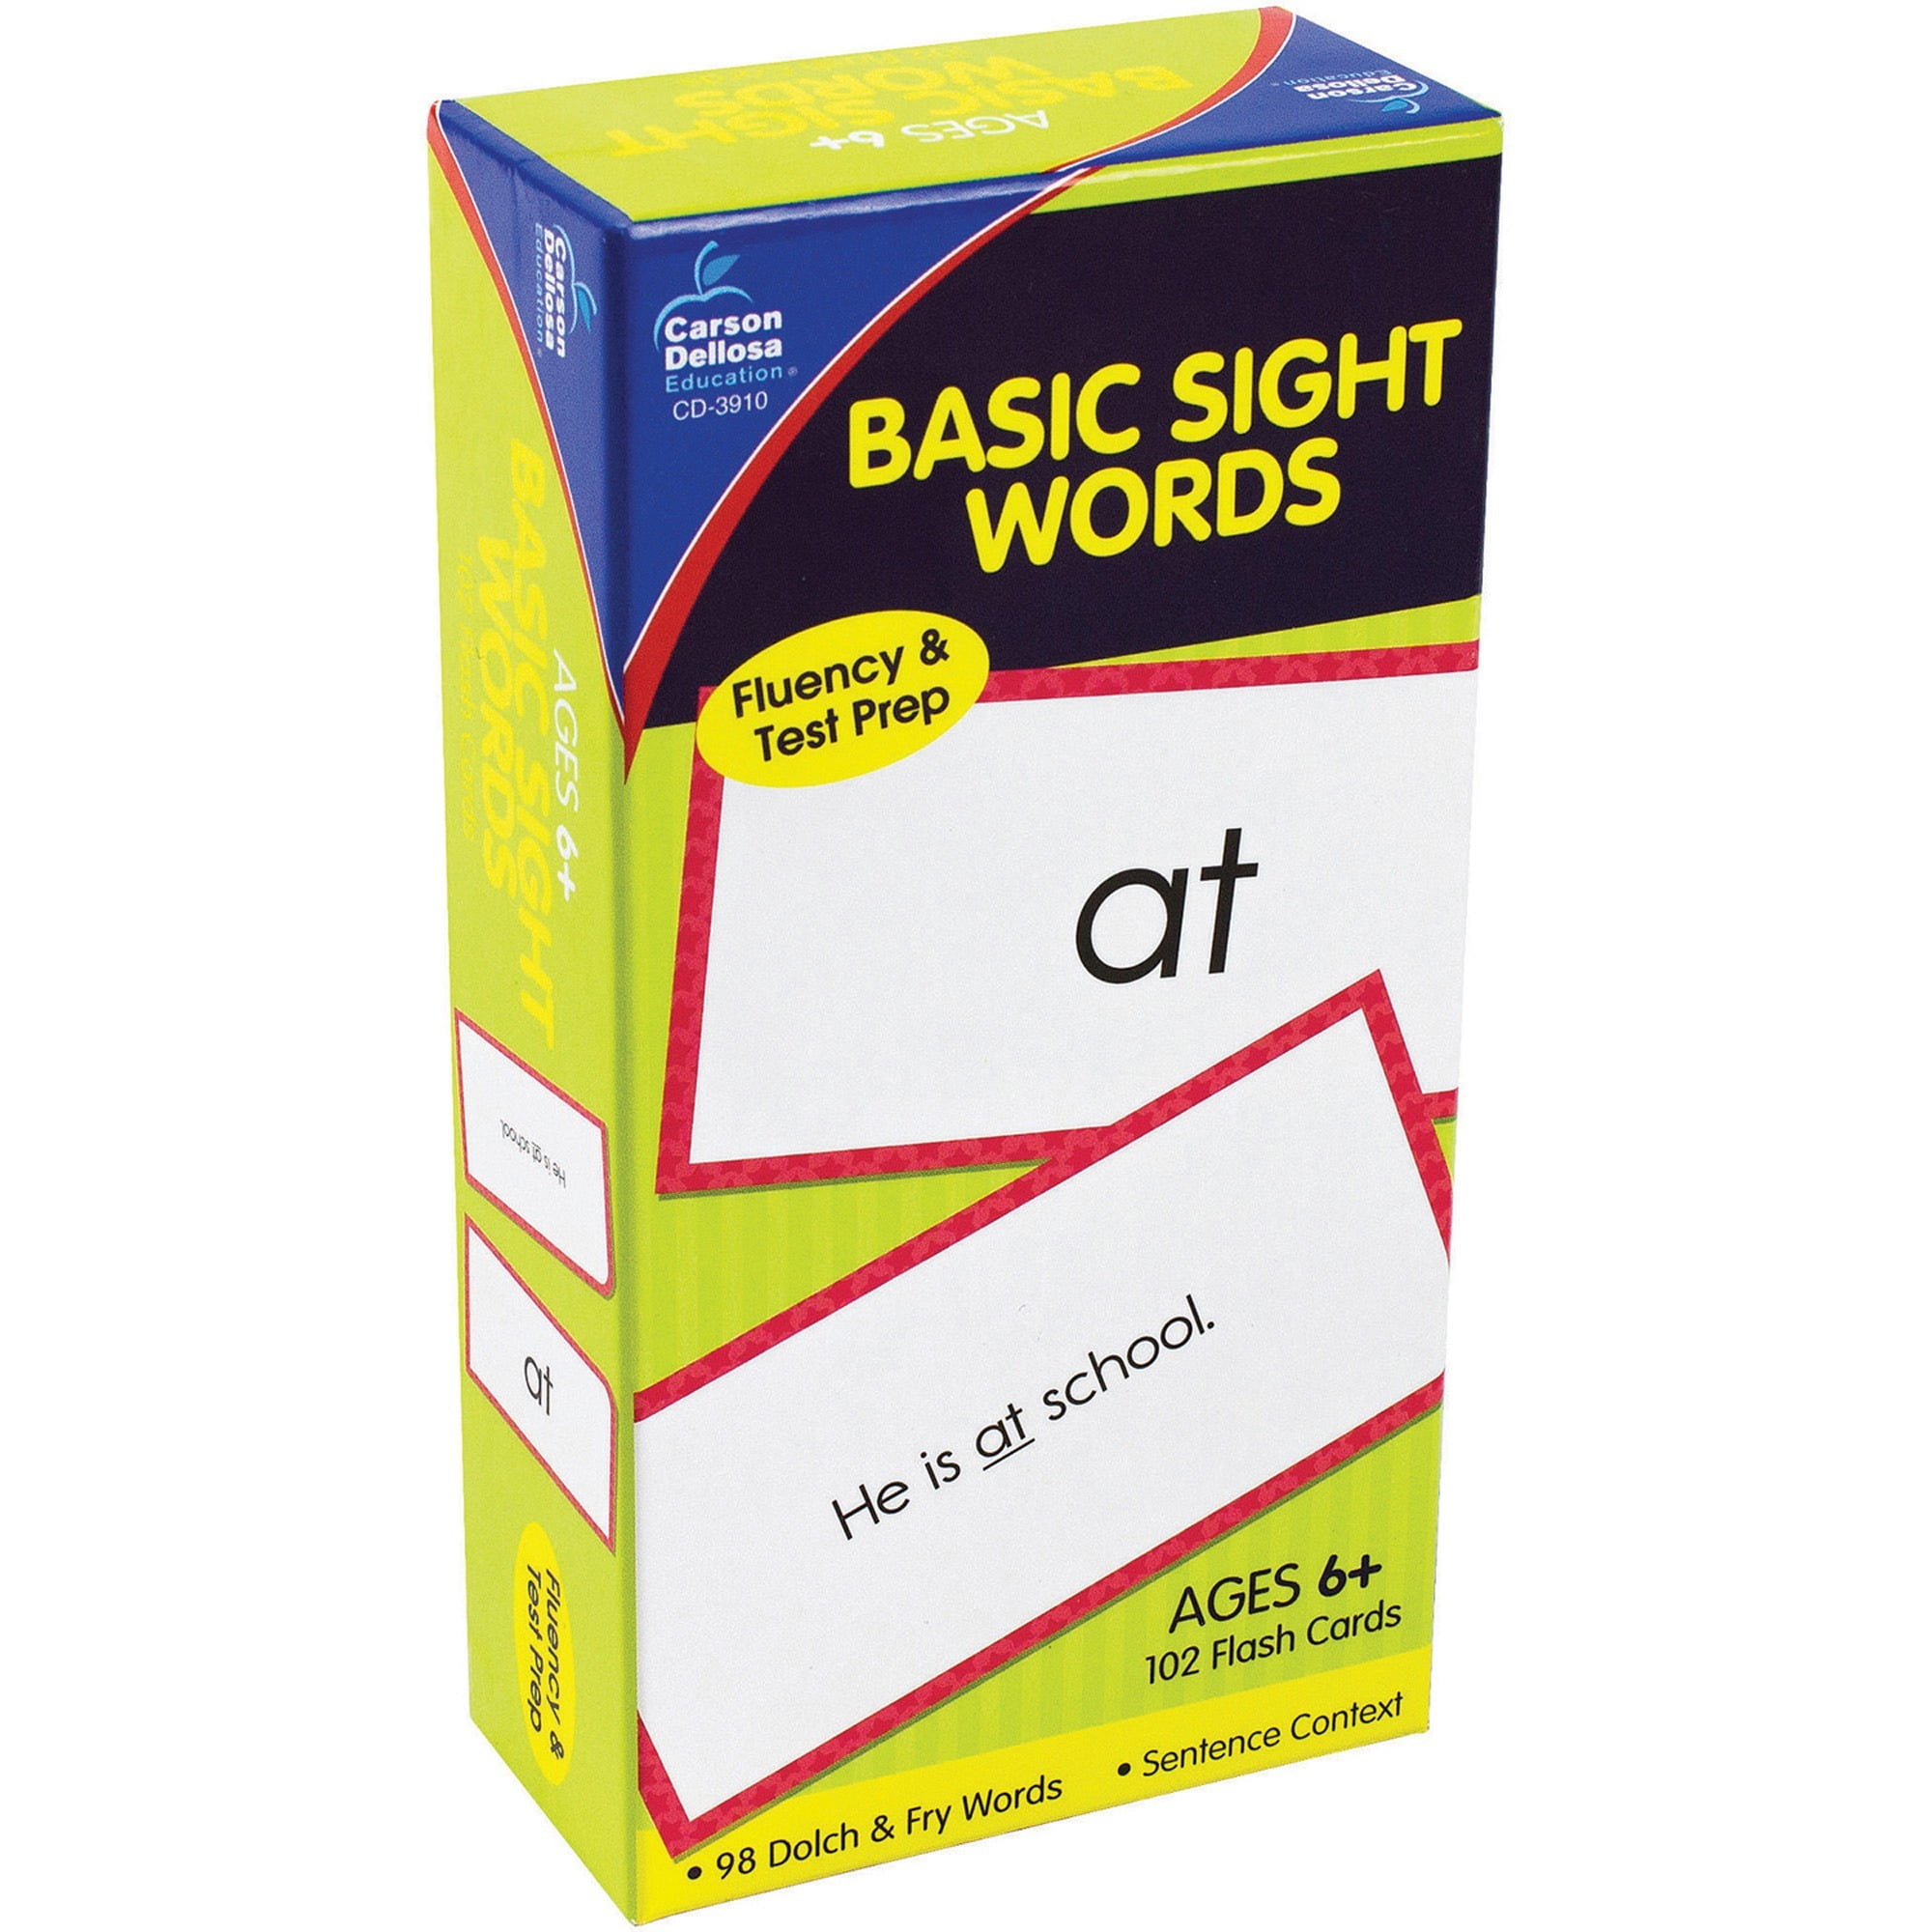 Carson Dellosa Basic Sight Words Flash Cards—Double-Sided Grades 1-3 Dolch 